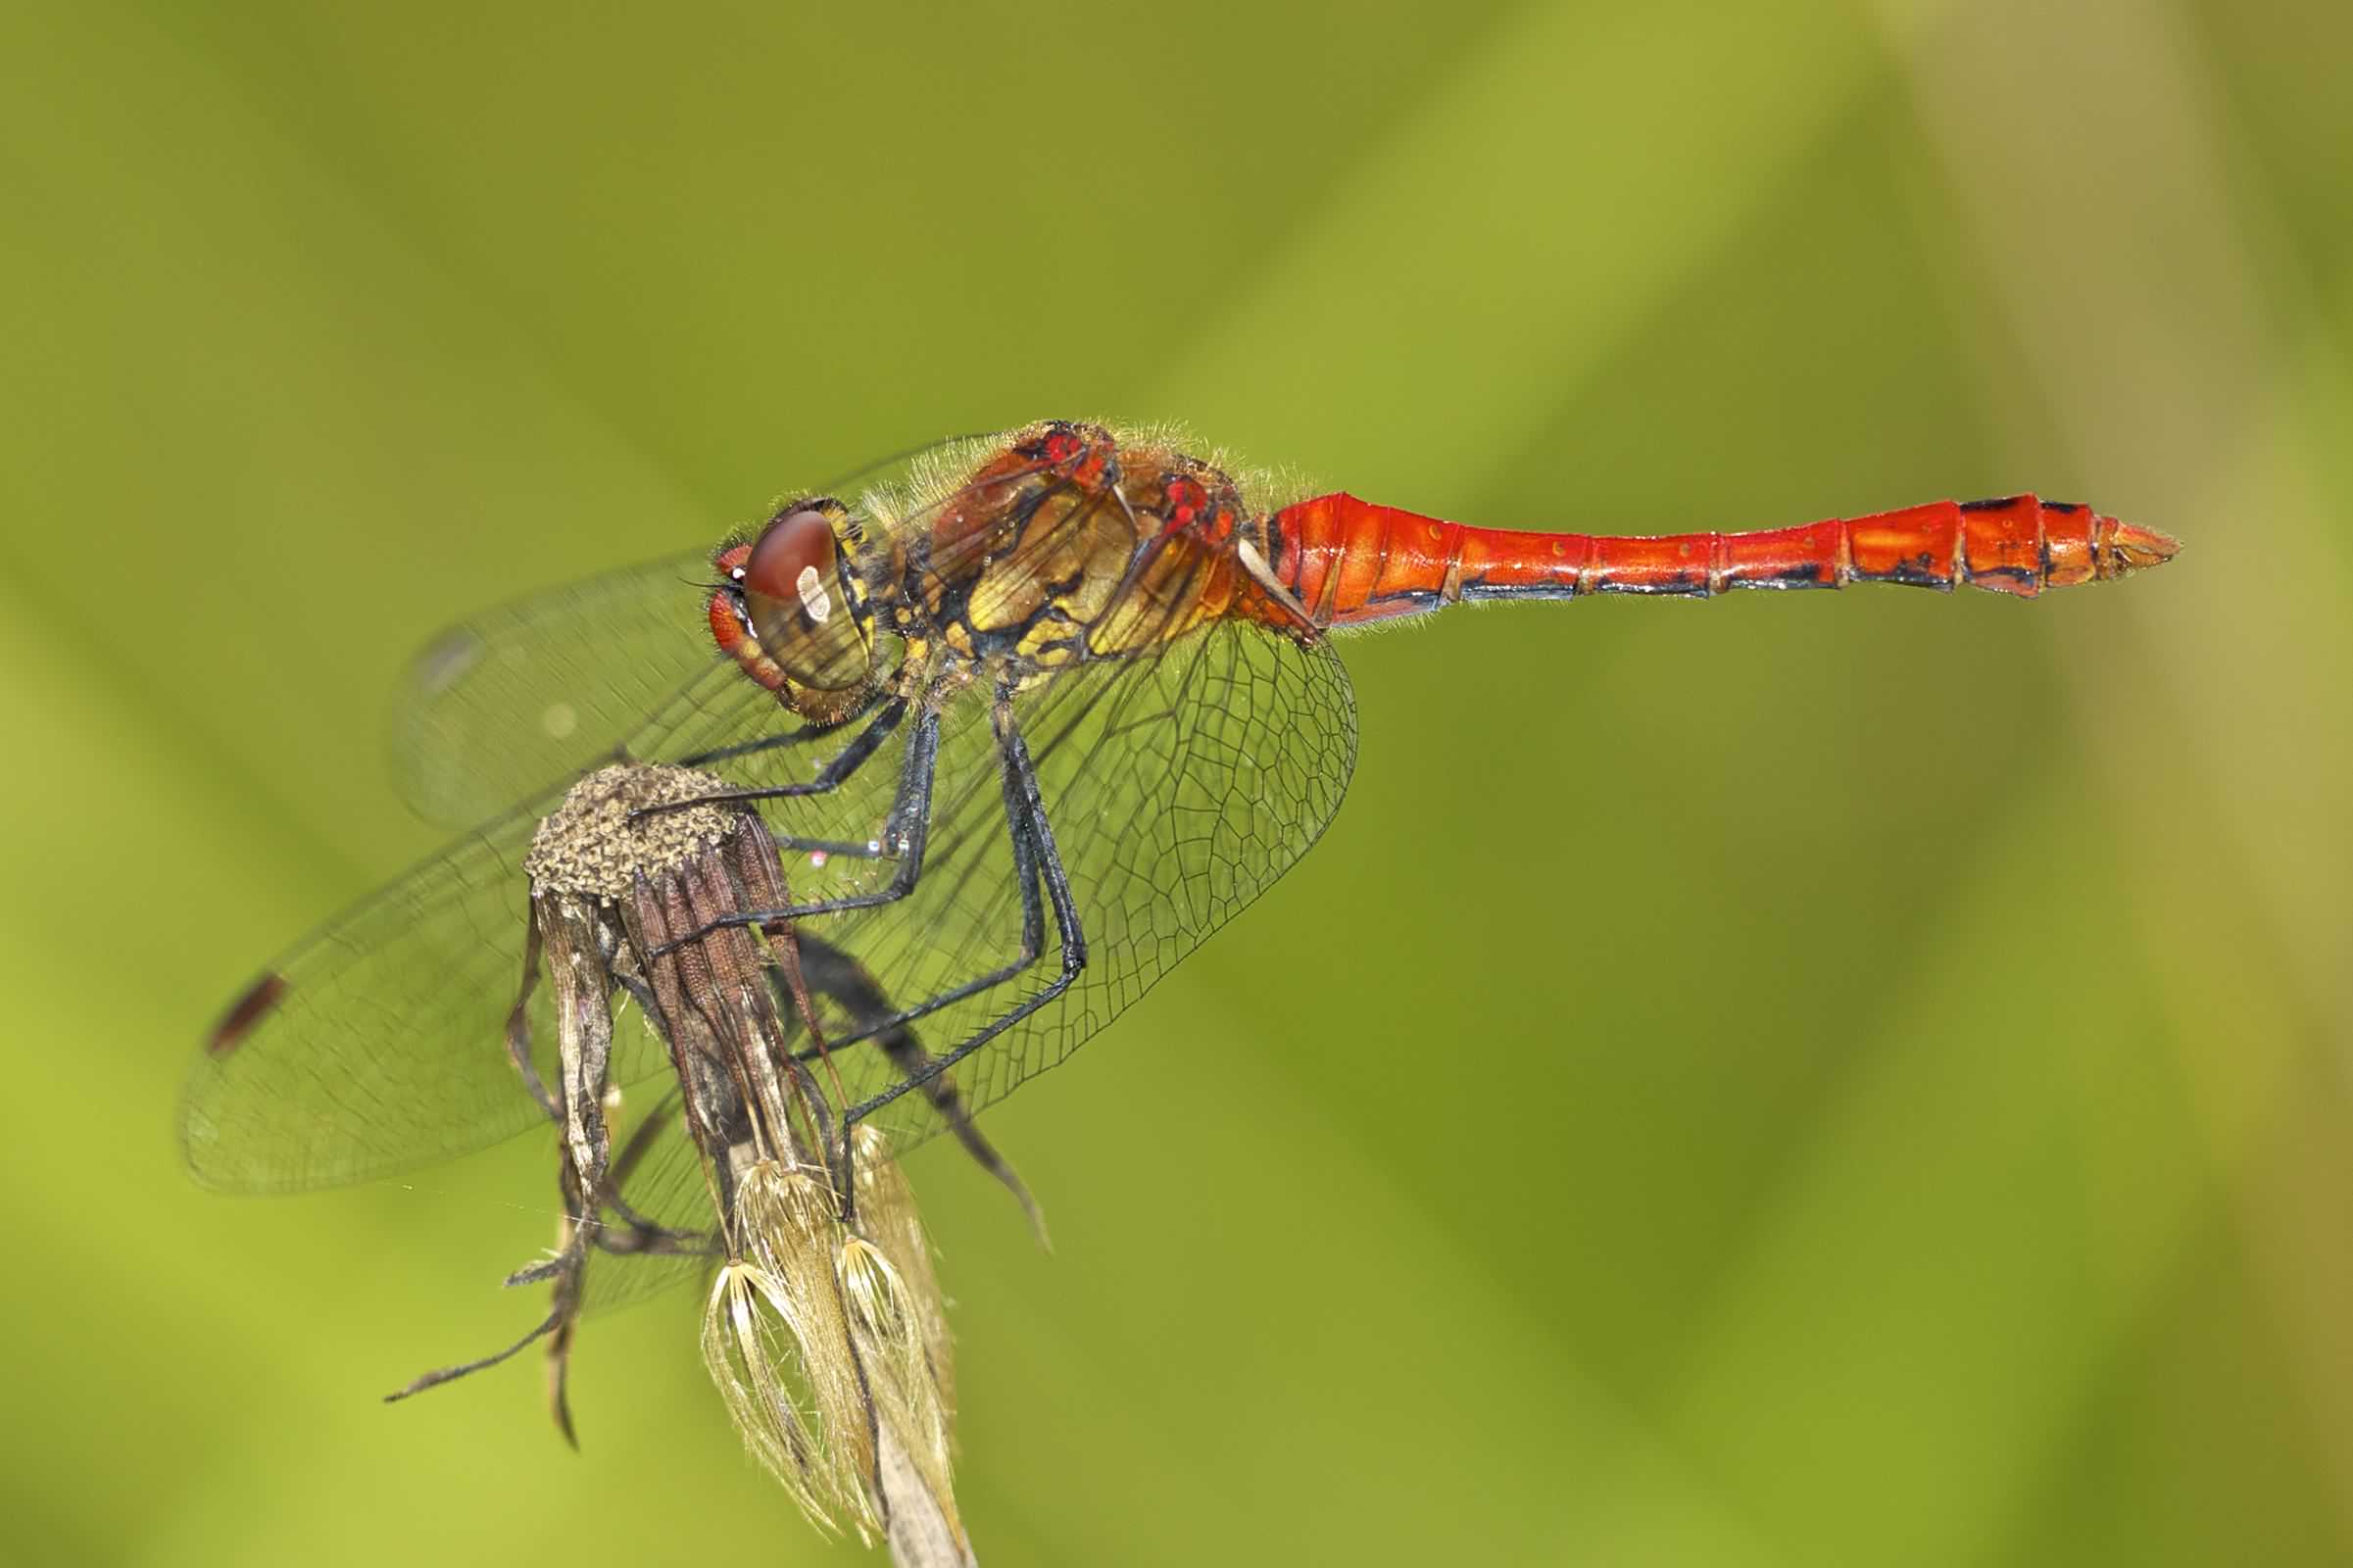 Ruddy Darter male - Sympetrum sanguineum, click for a larger image, photo licensed for reuse CCASA3.0